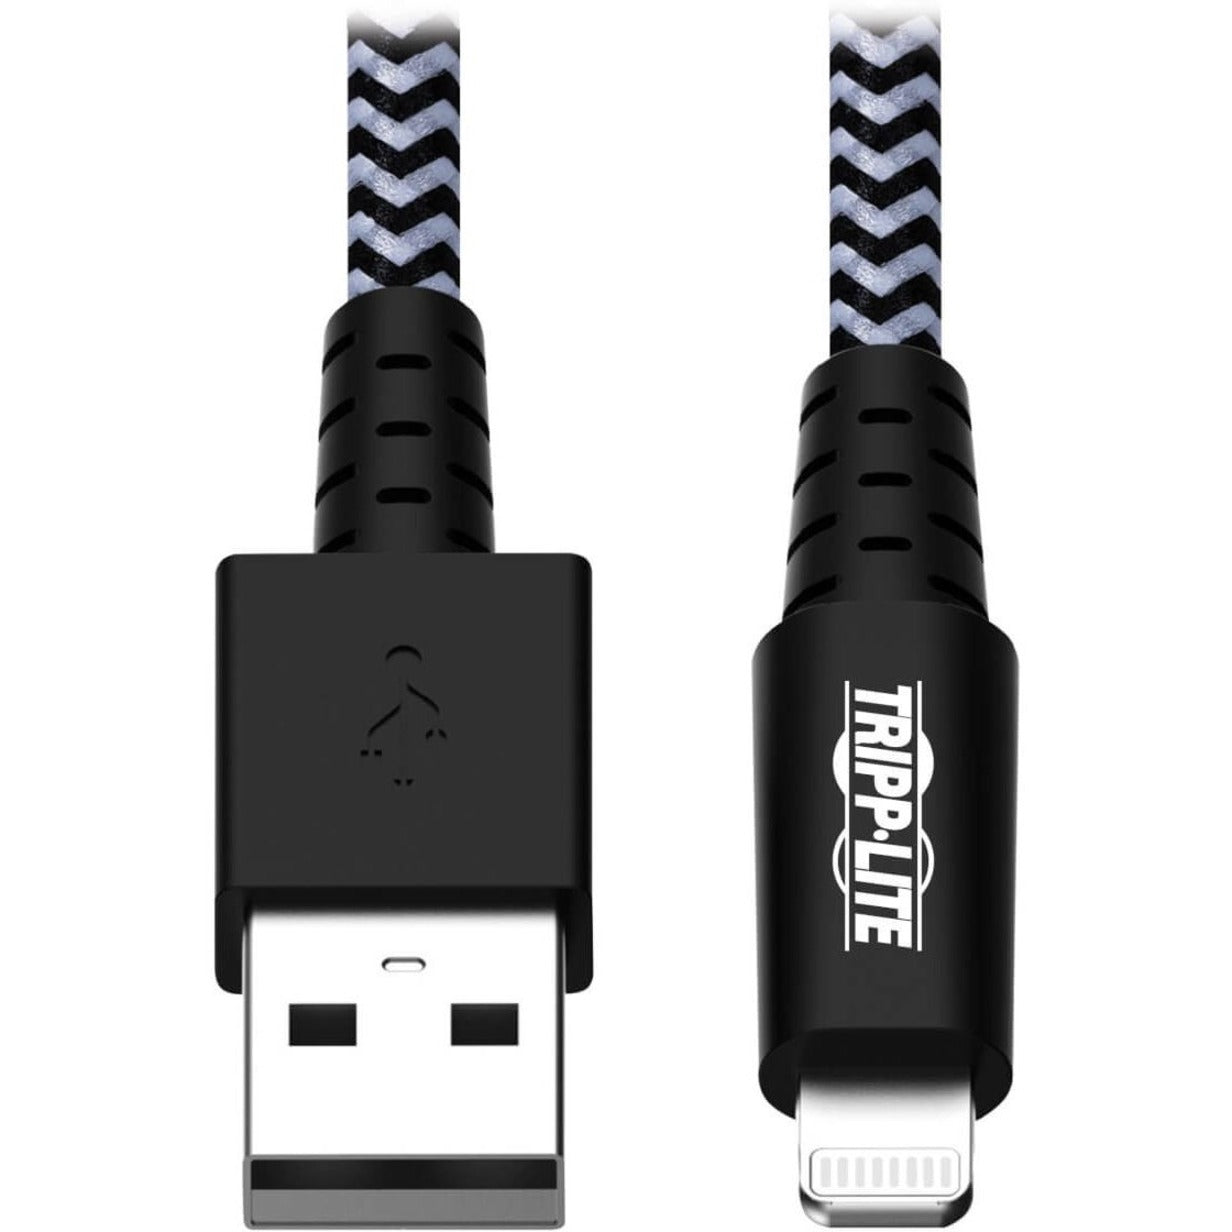 Tripp Lite M100-003-HD Heavy-Duty USB Sync/Charge Cable with Lightning Connector, 3 ft. (0.9 m)